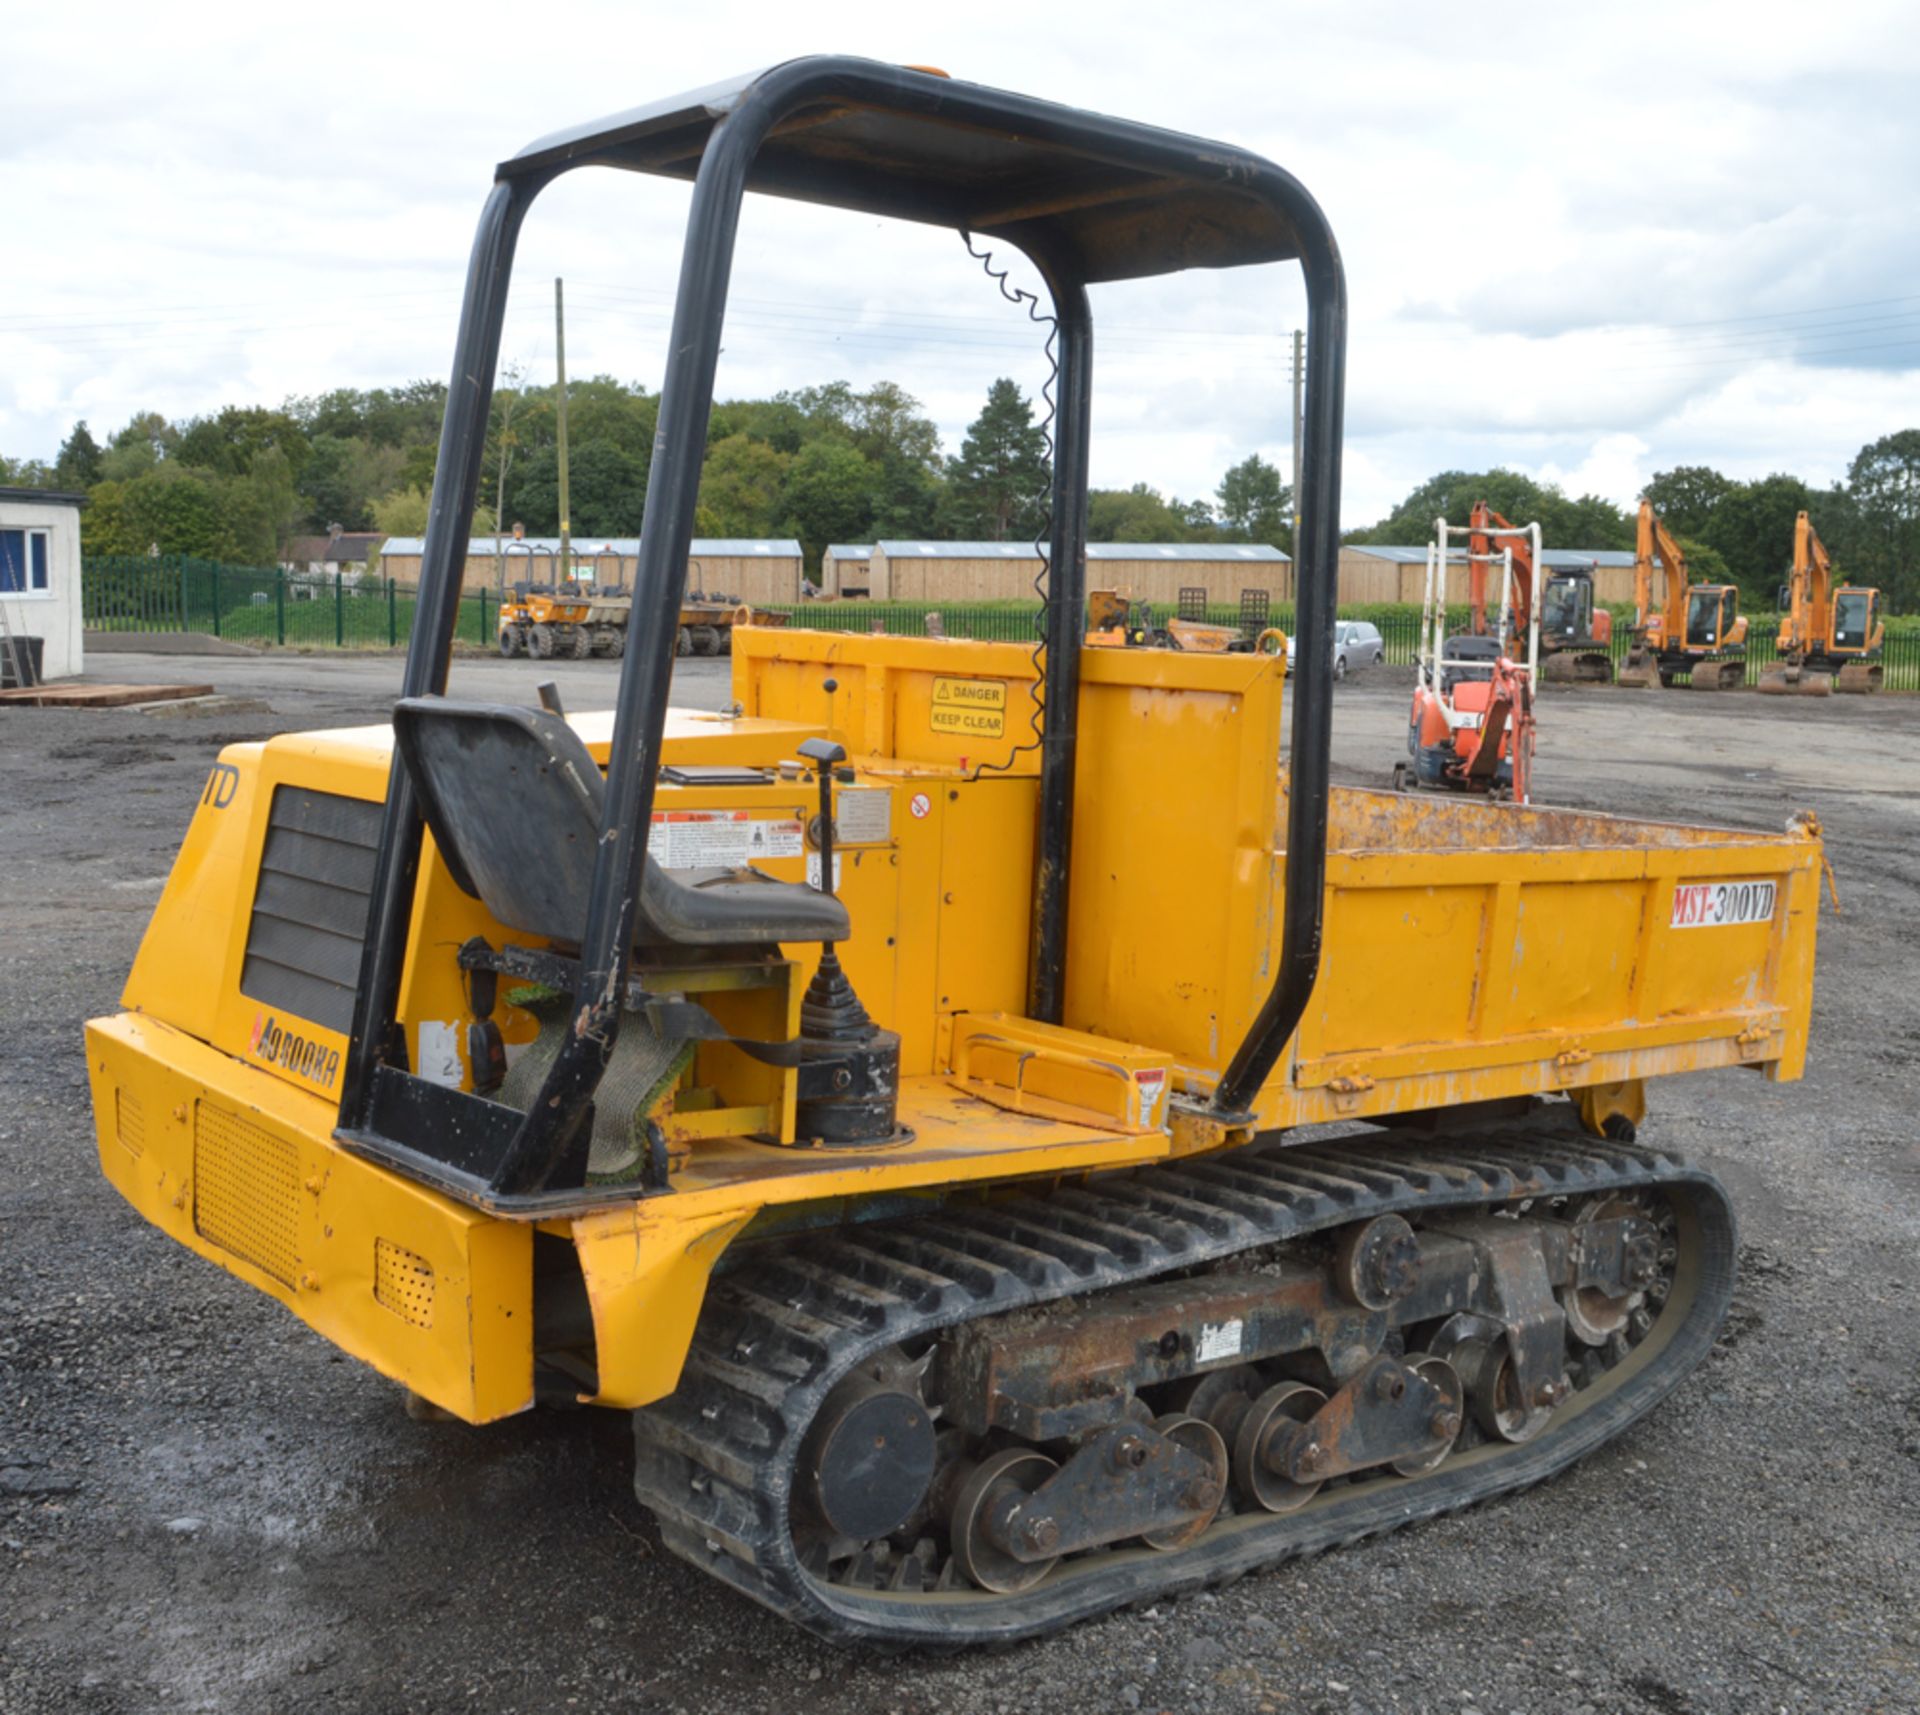 Morooka MST 300-VD 2.5 tonne rubber tracked dumper  Year: 2002 S/N: 3481 Recorded hours: 1103 - Image 2 of 9